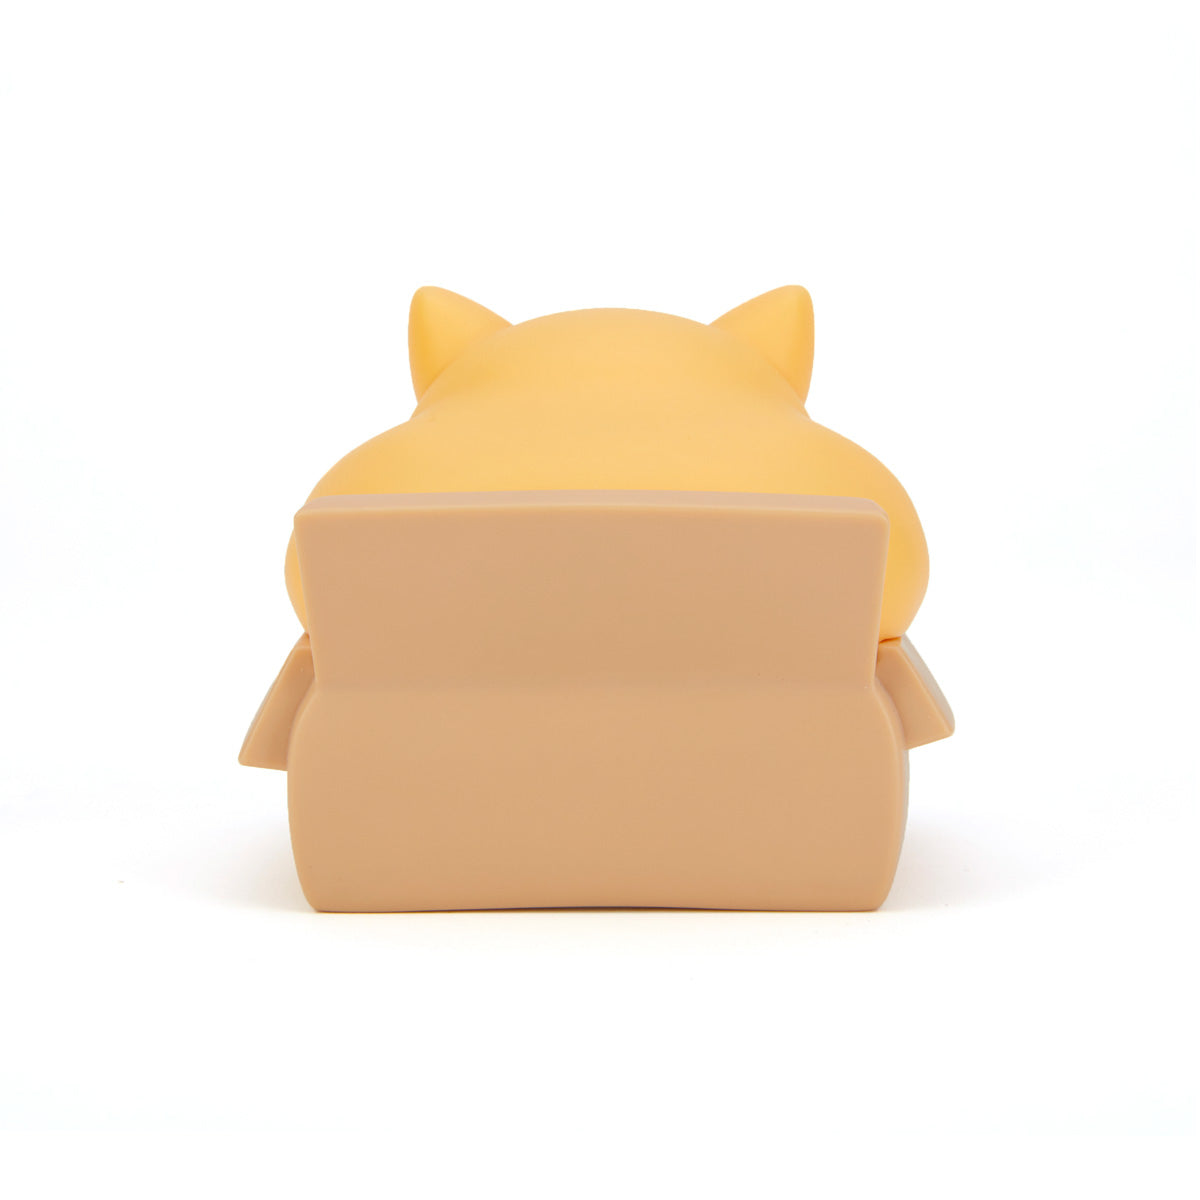 Chonky Trash Kitty Night Light from the back